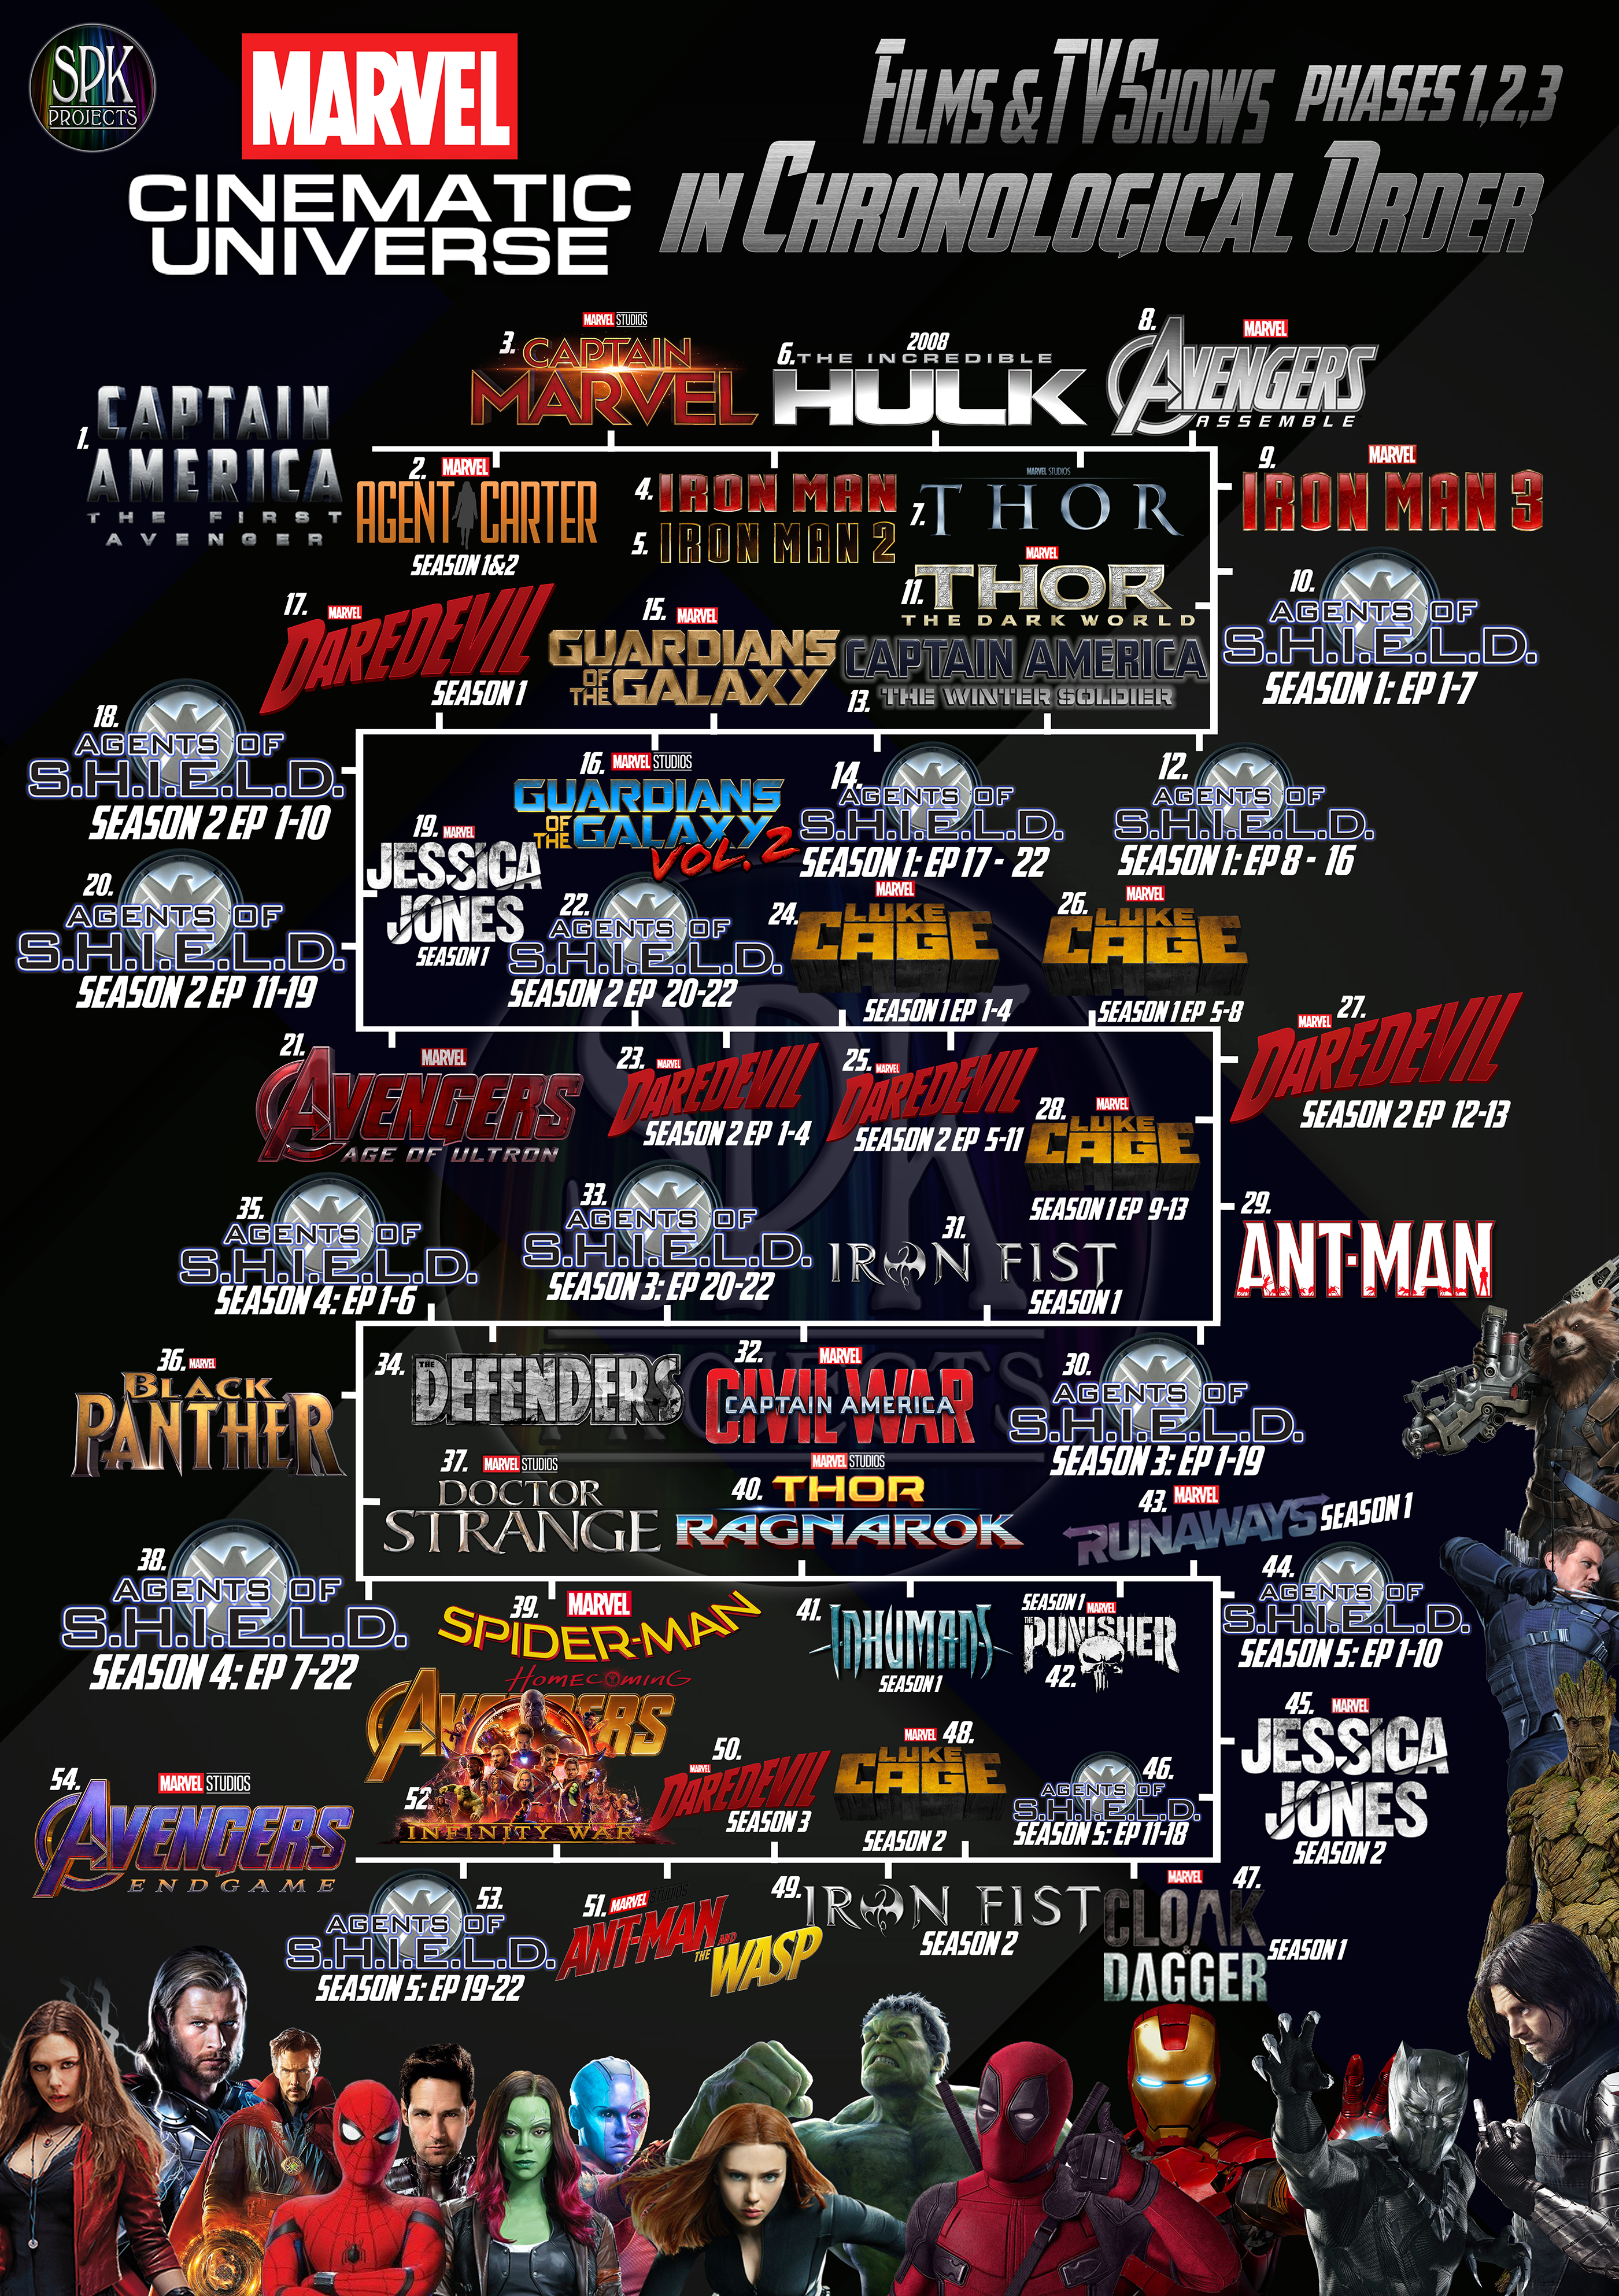 The Marvel Cinematic Universe in Chronological Order. Behance